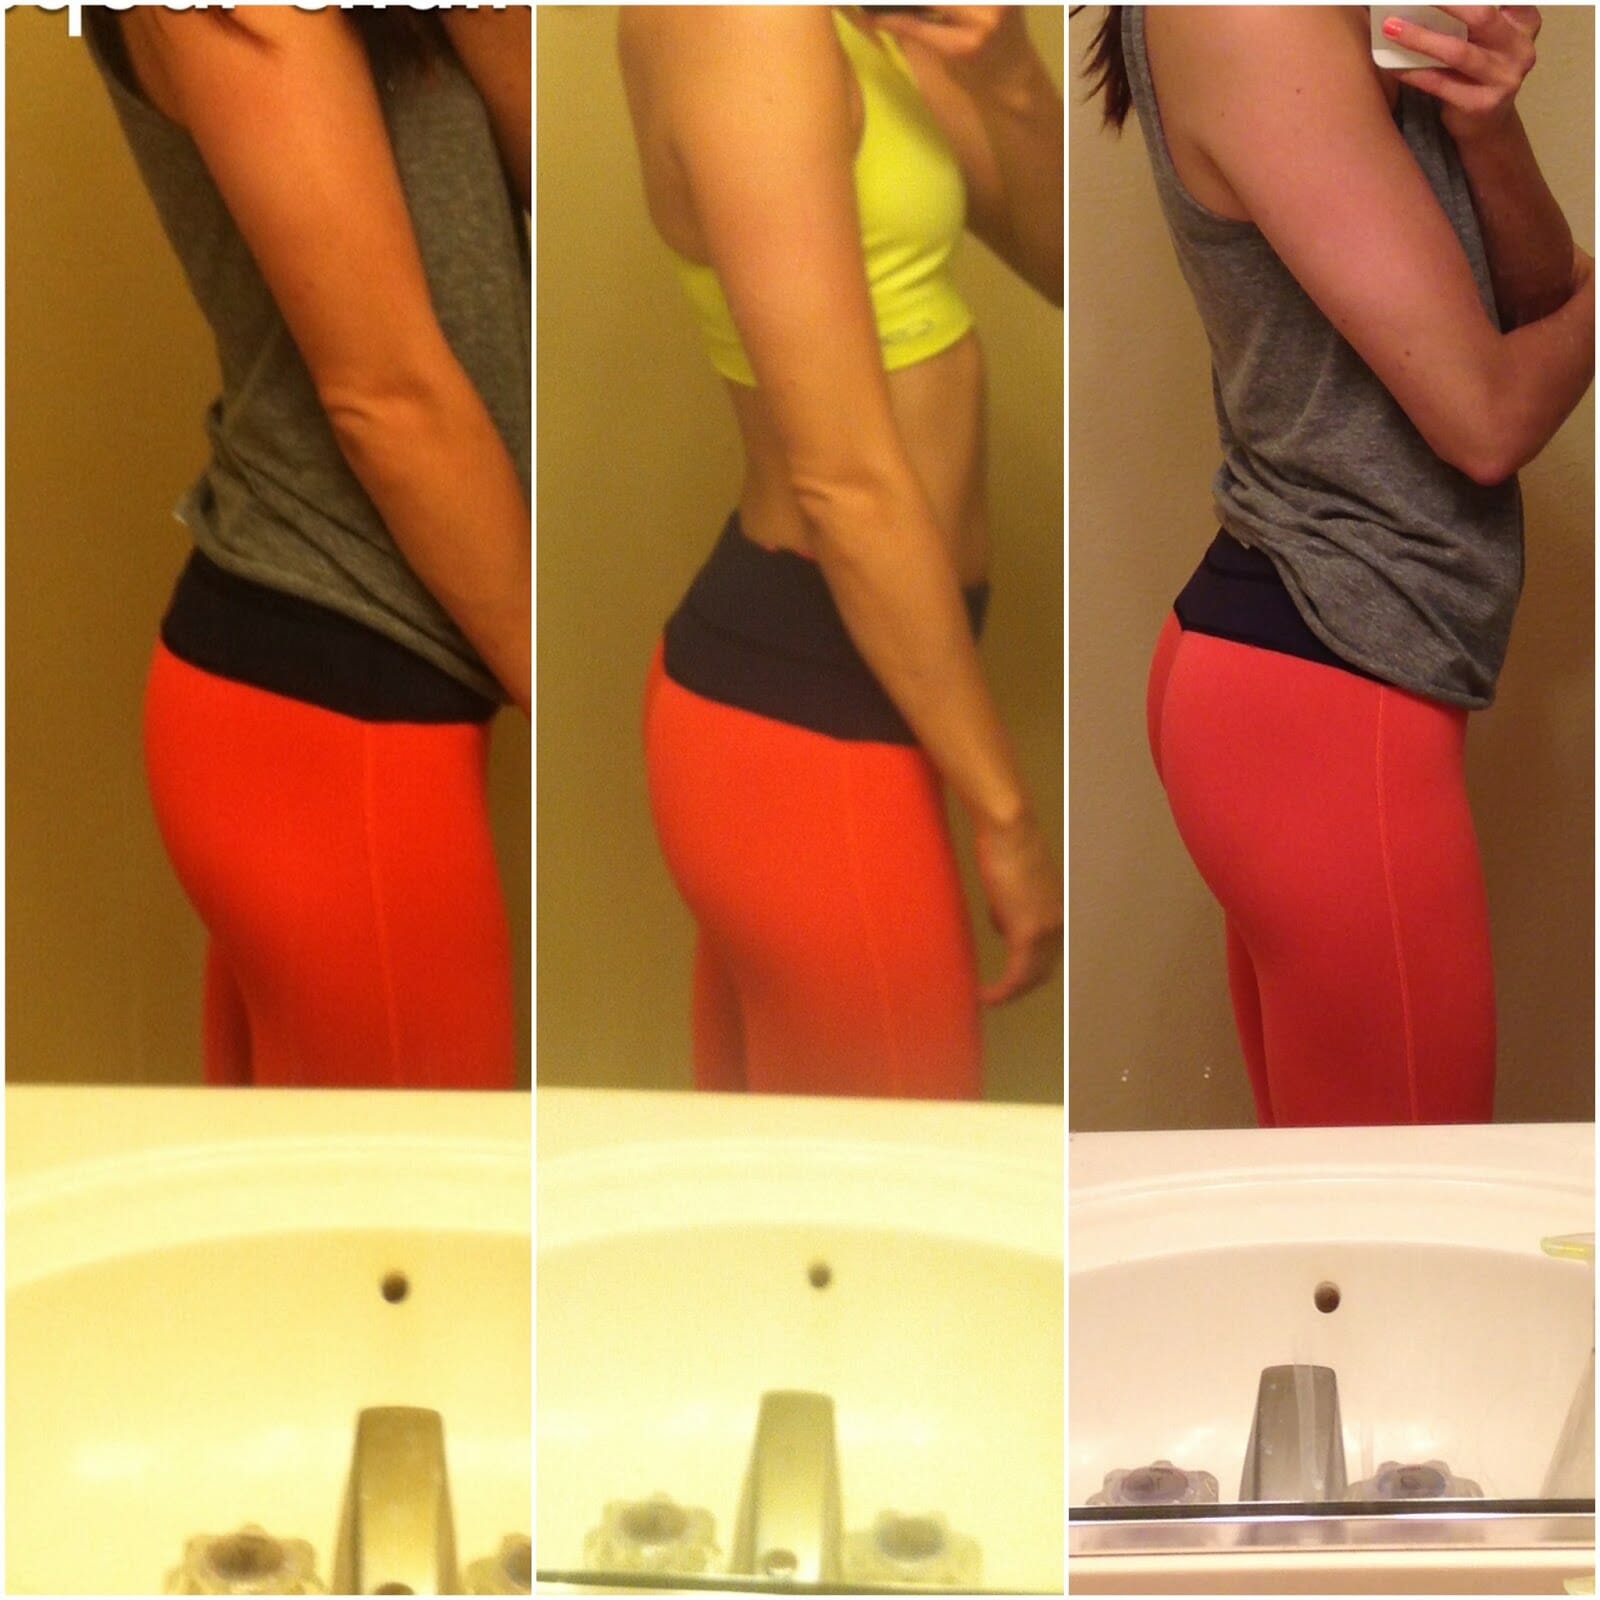 plank and squat challenge results